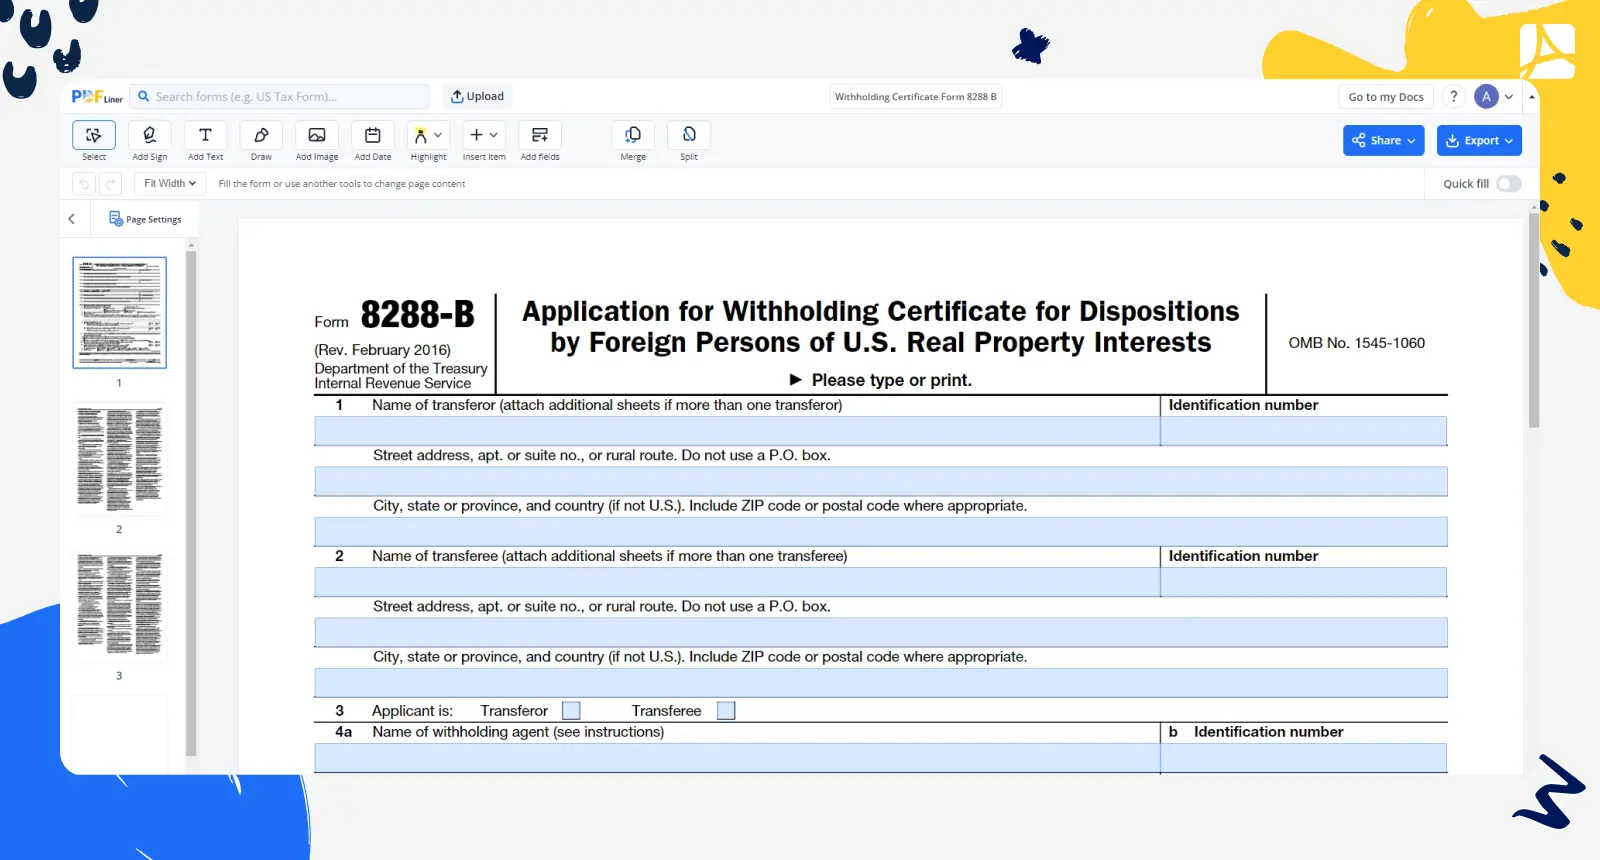 Withholding Certificate Form 8288 B screenshot